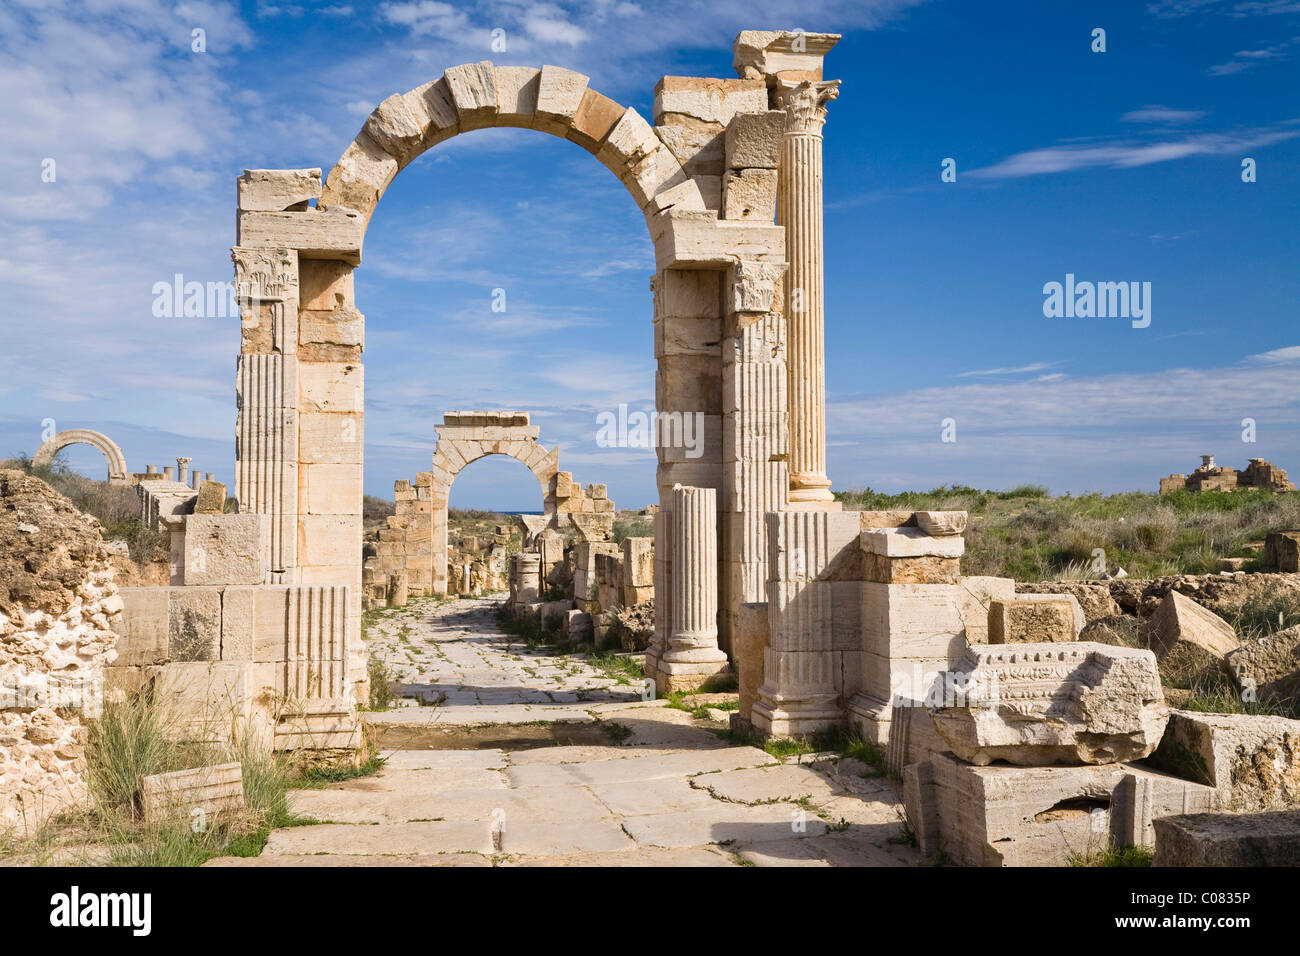 Arch of Trajan on Via Trionfale, Arch of Tiberius in the back, Leptis Magna, Libya, North Africa Stock Photo